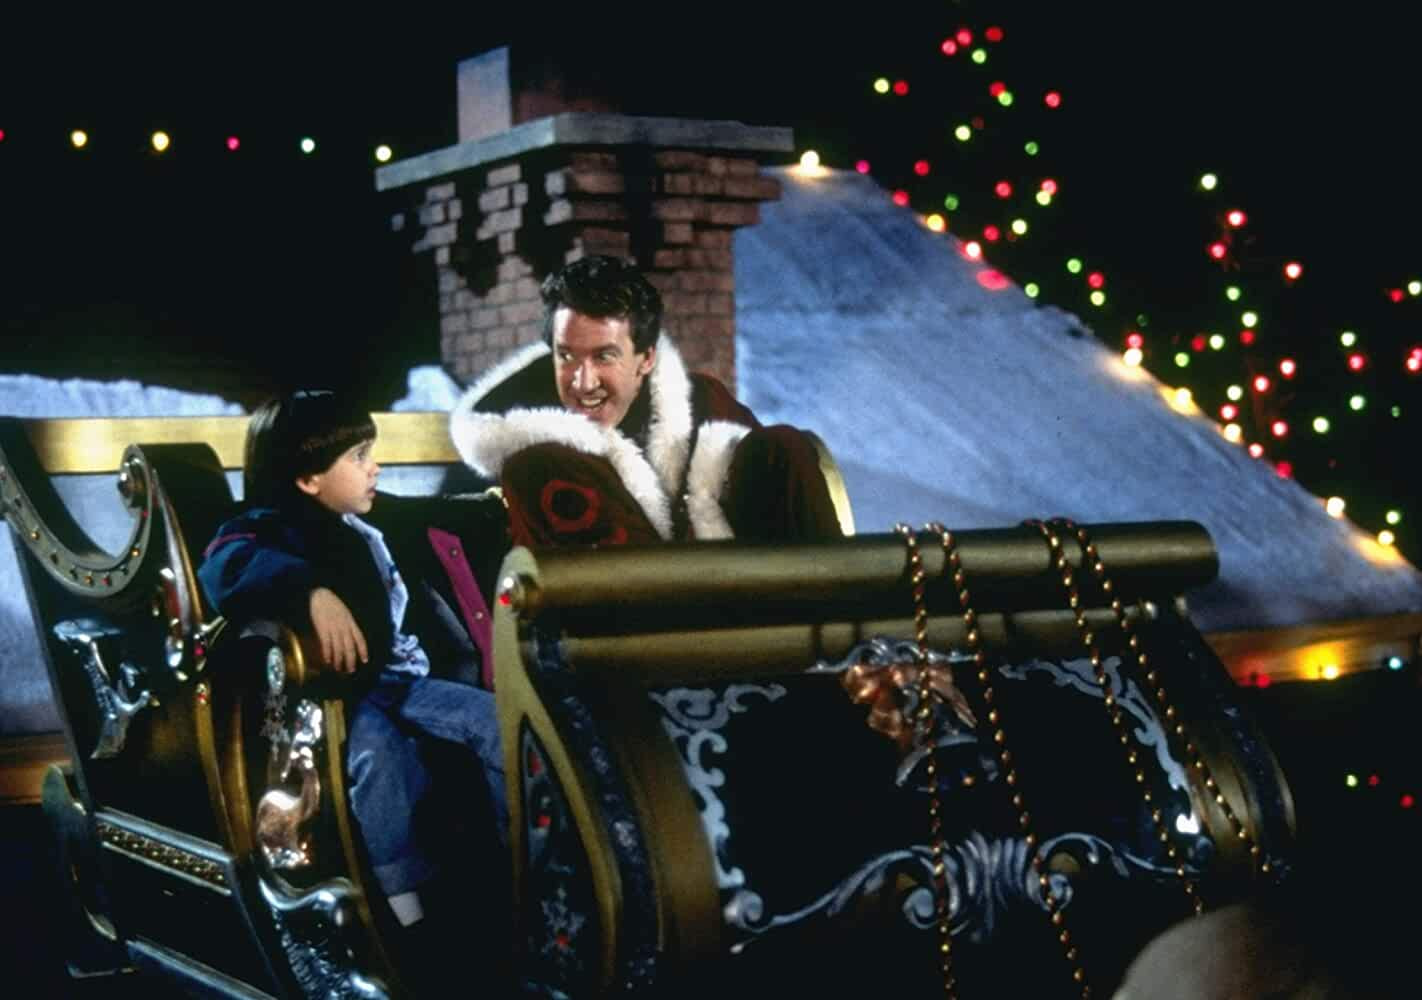 A scene from The Santa Clause